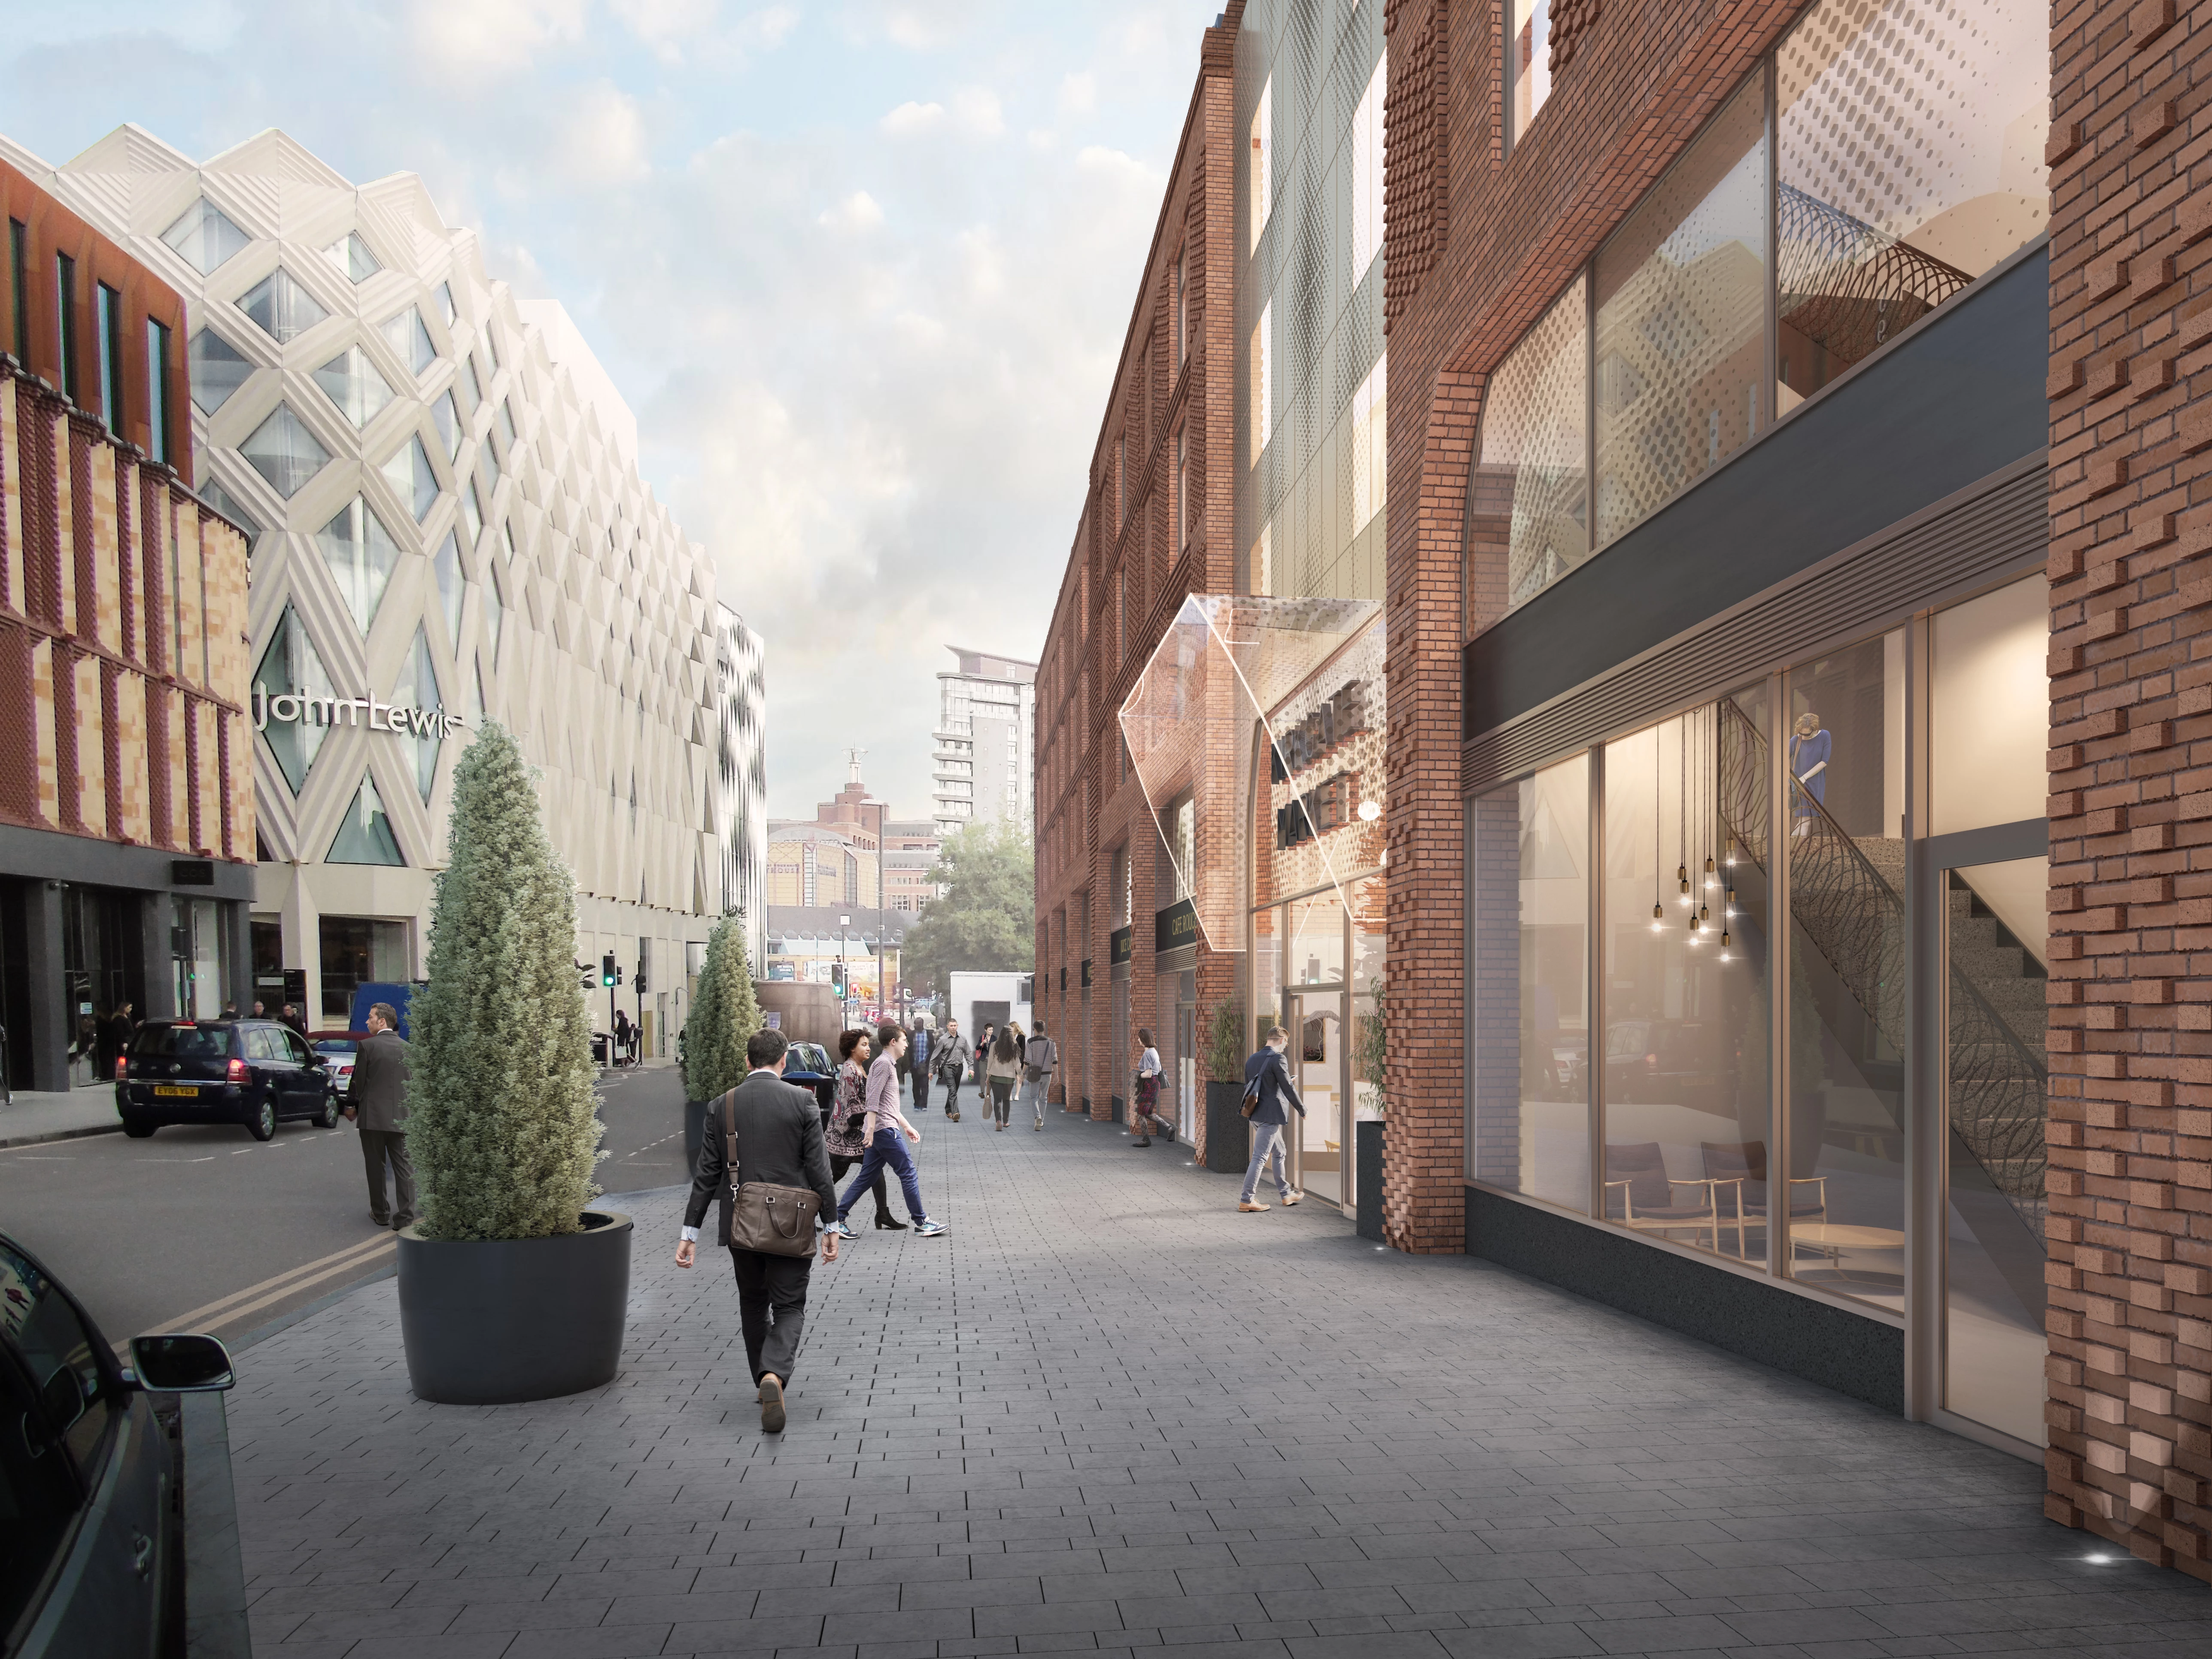 An artist's impression of what the redevelopment of George Street would look like.